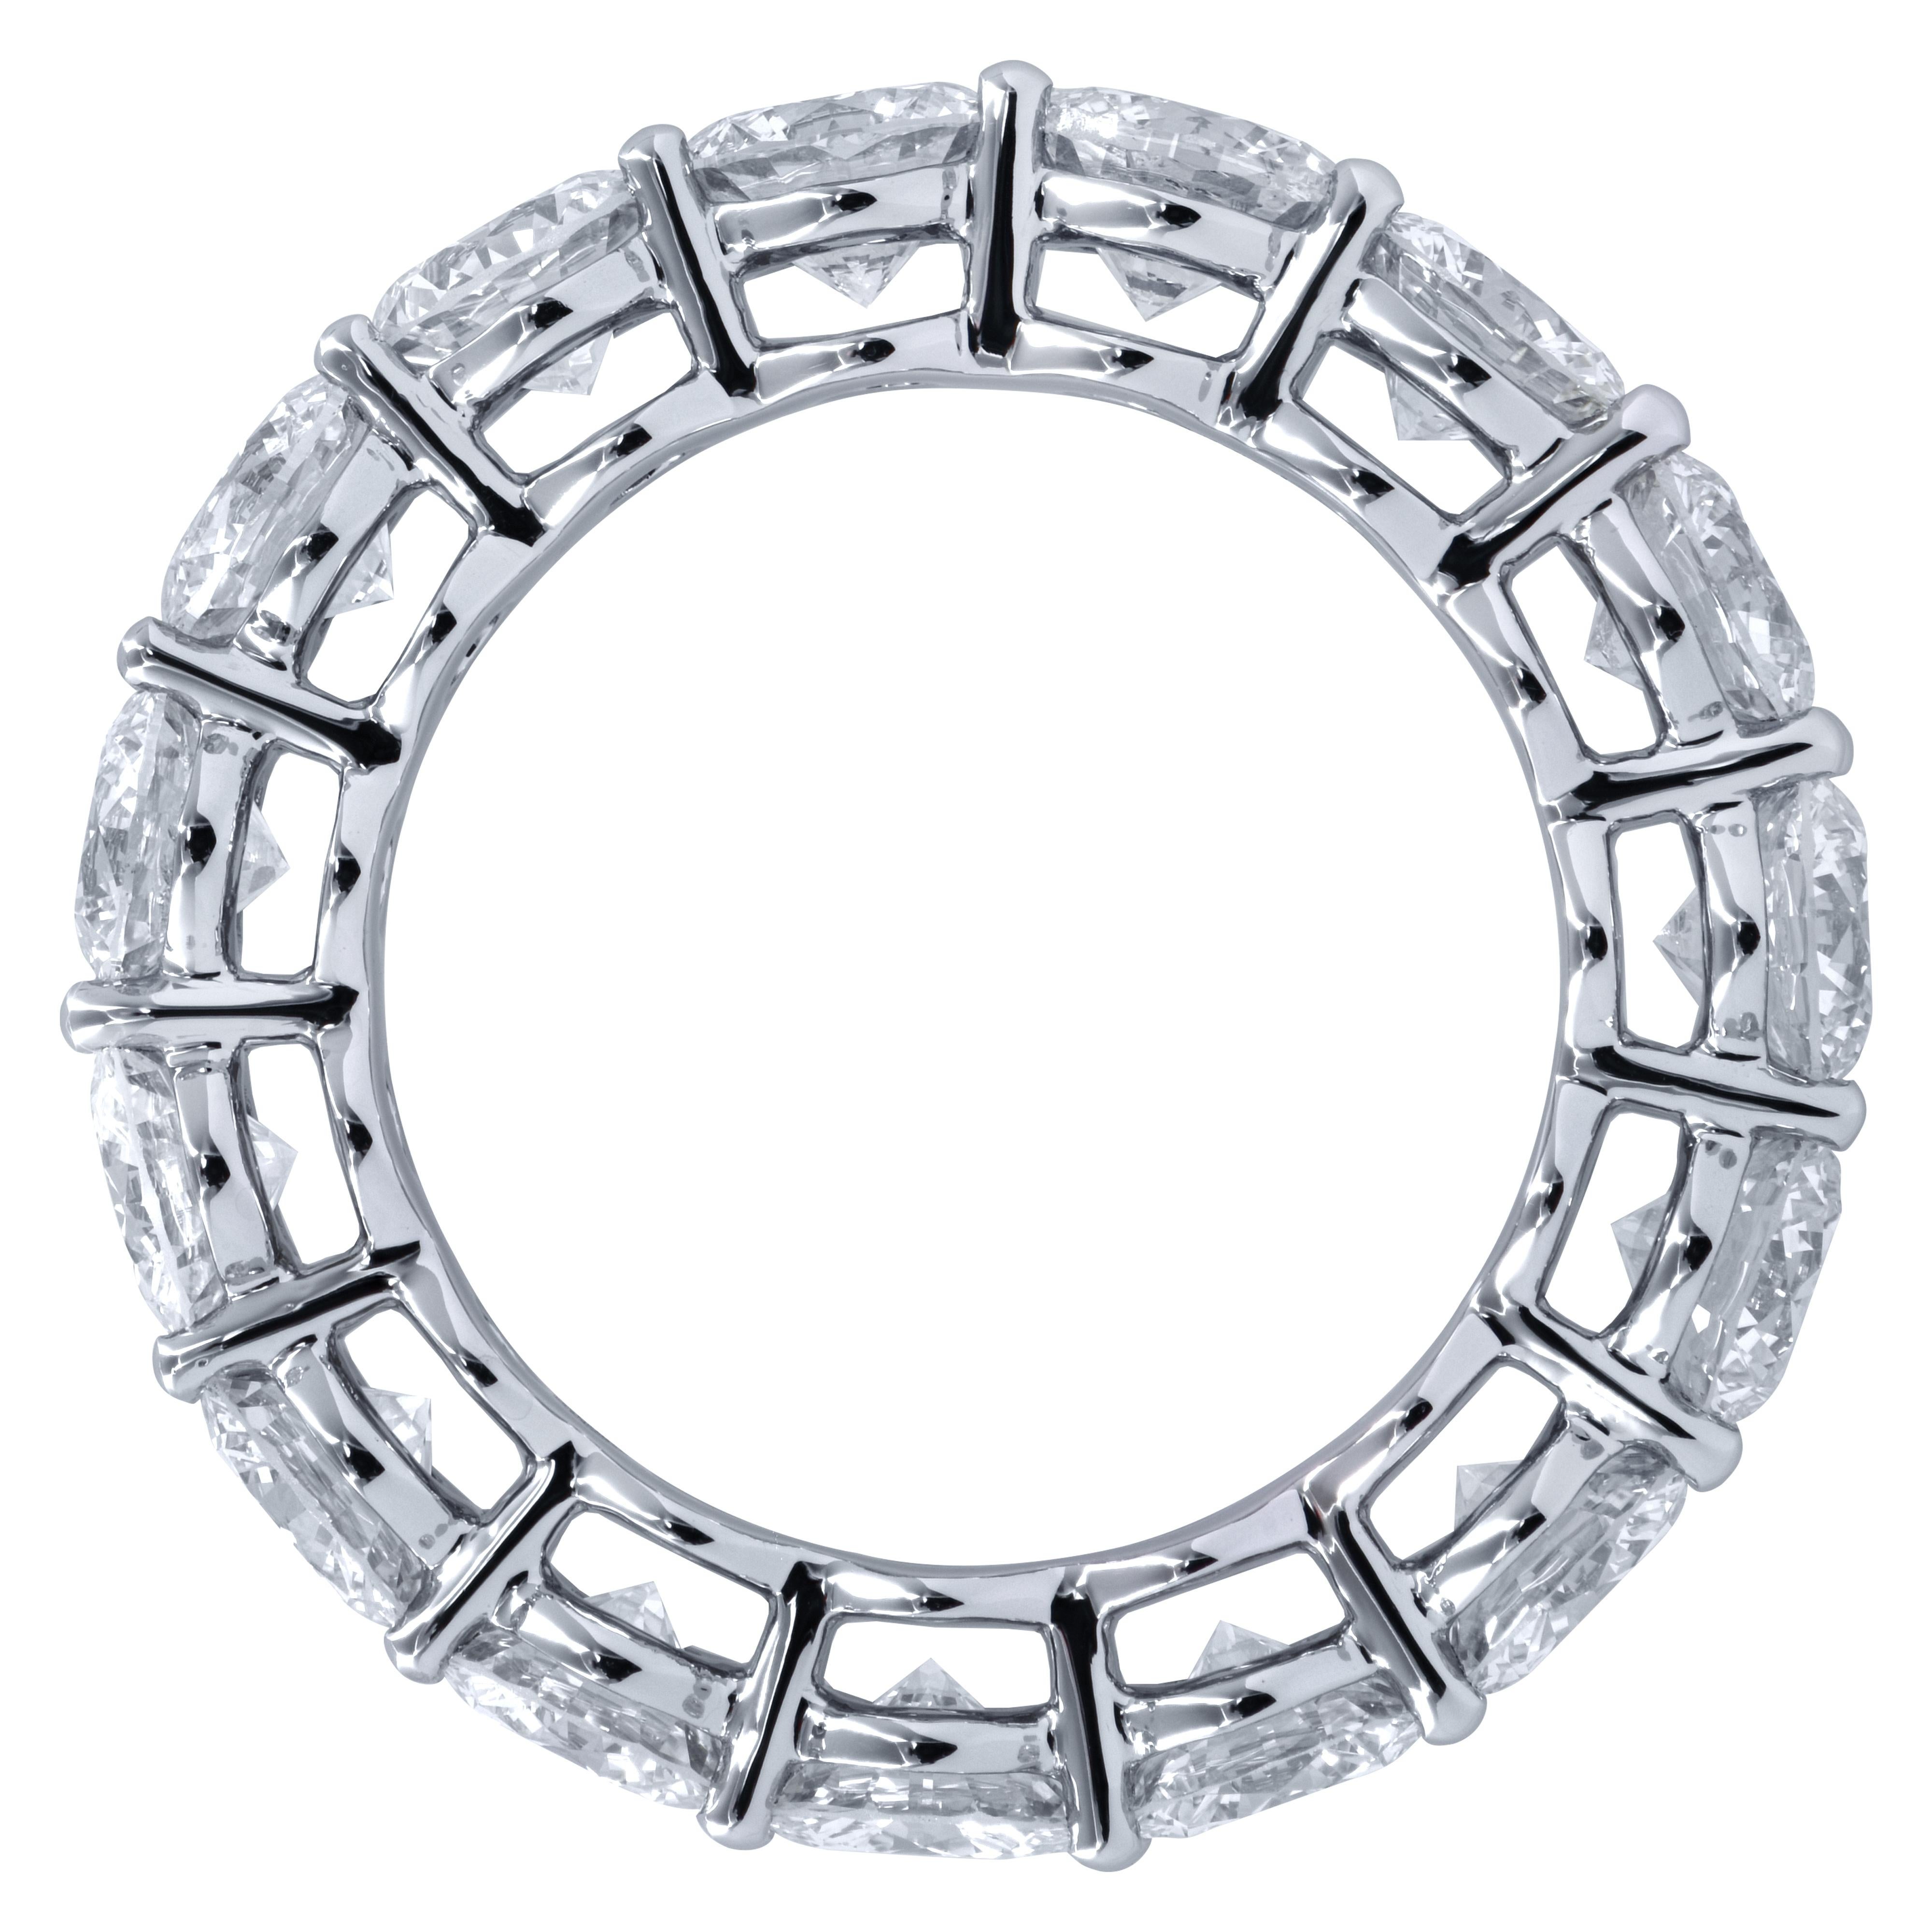 Exquisite eternity band crafted in Platinum, showcasing 15 stunning round brilliant cut diamonds weighing 5.80 carats total, G-J color, VS-SI clarity. Each diamond is carefully selected, perfectly matched and set in a seamless sea of eternity,